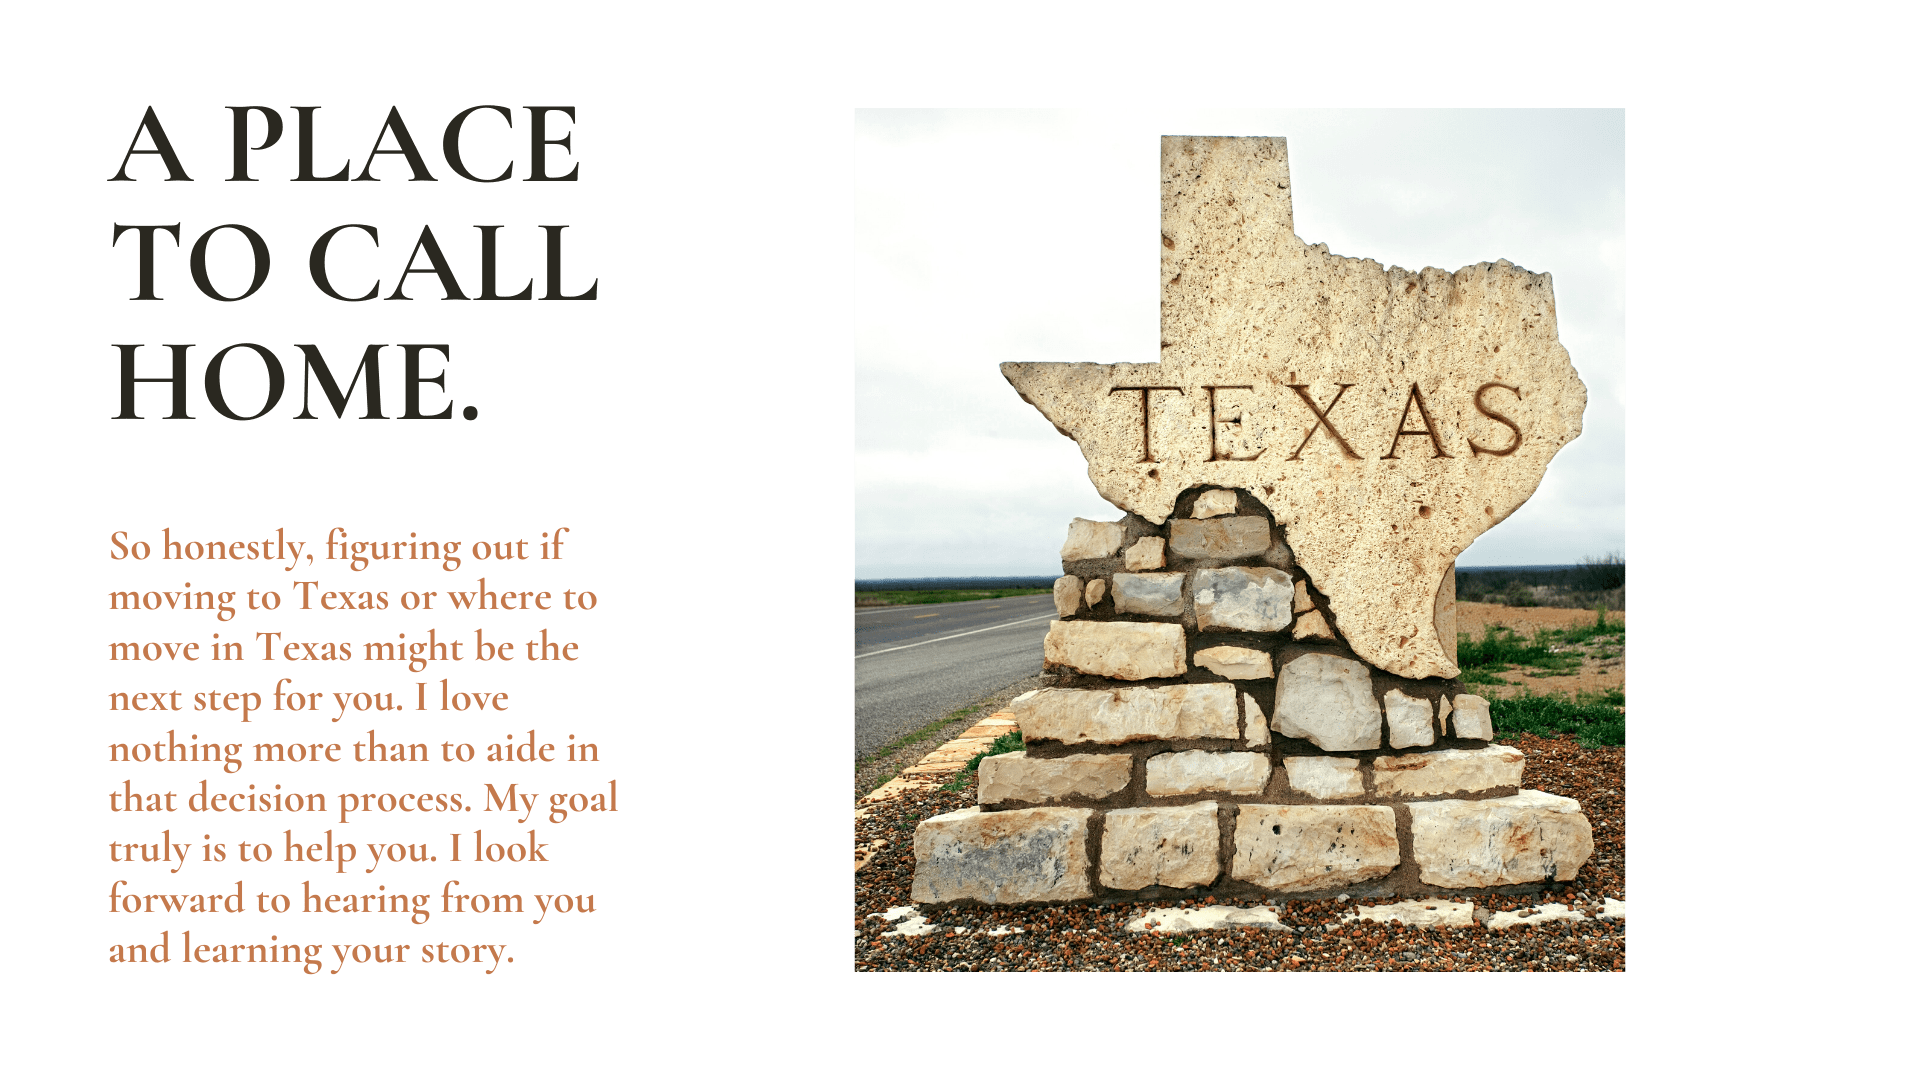 so honestly, figuriing out if moving to texas or where to move in texas might be the next step for you. i love nothing more than to aide in that decision process. my goal truly is to help you. i look forward to hearing from you and learning your story.